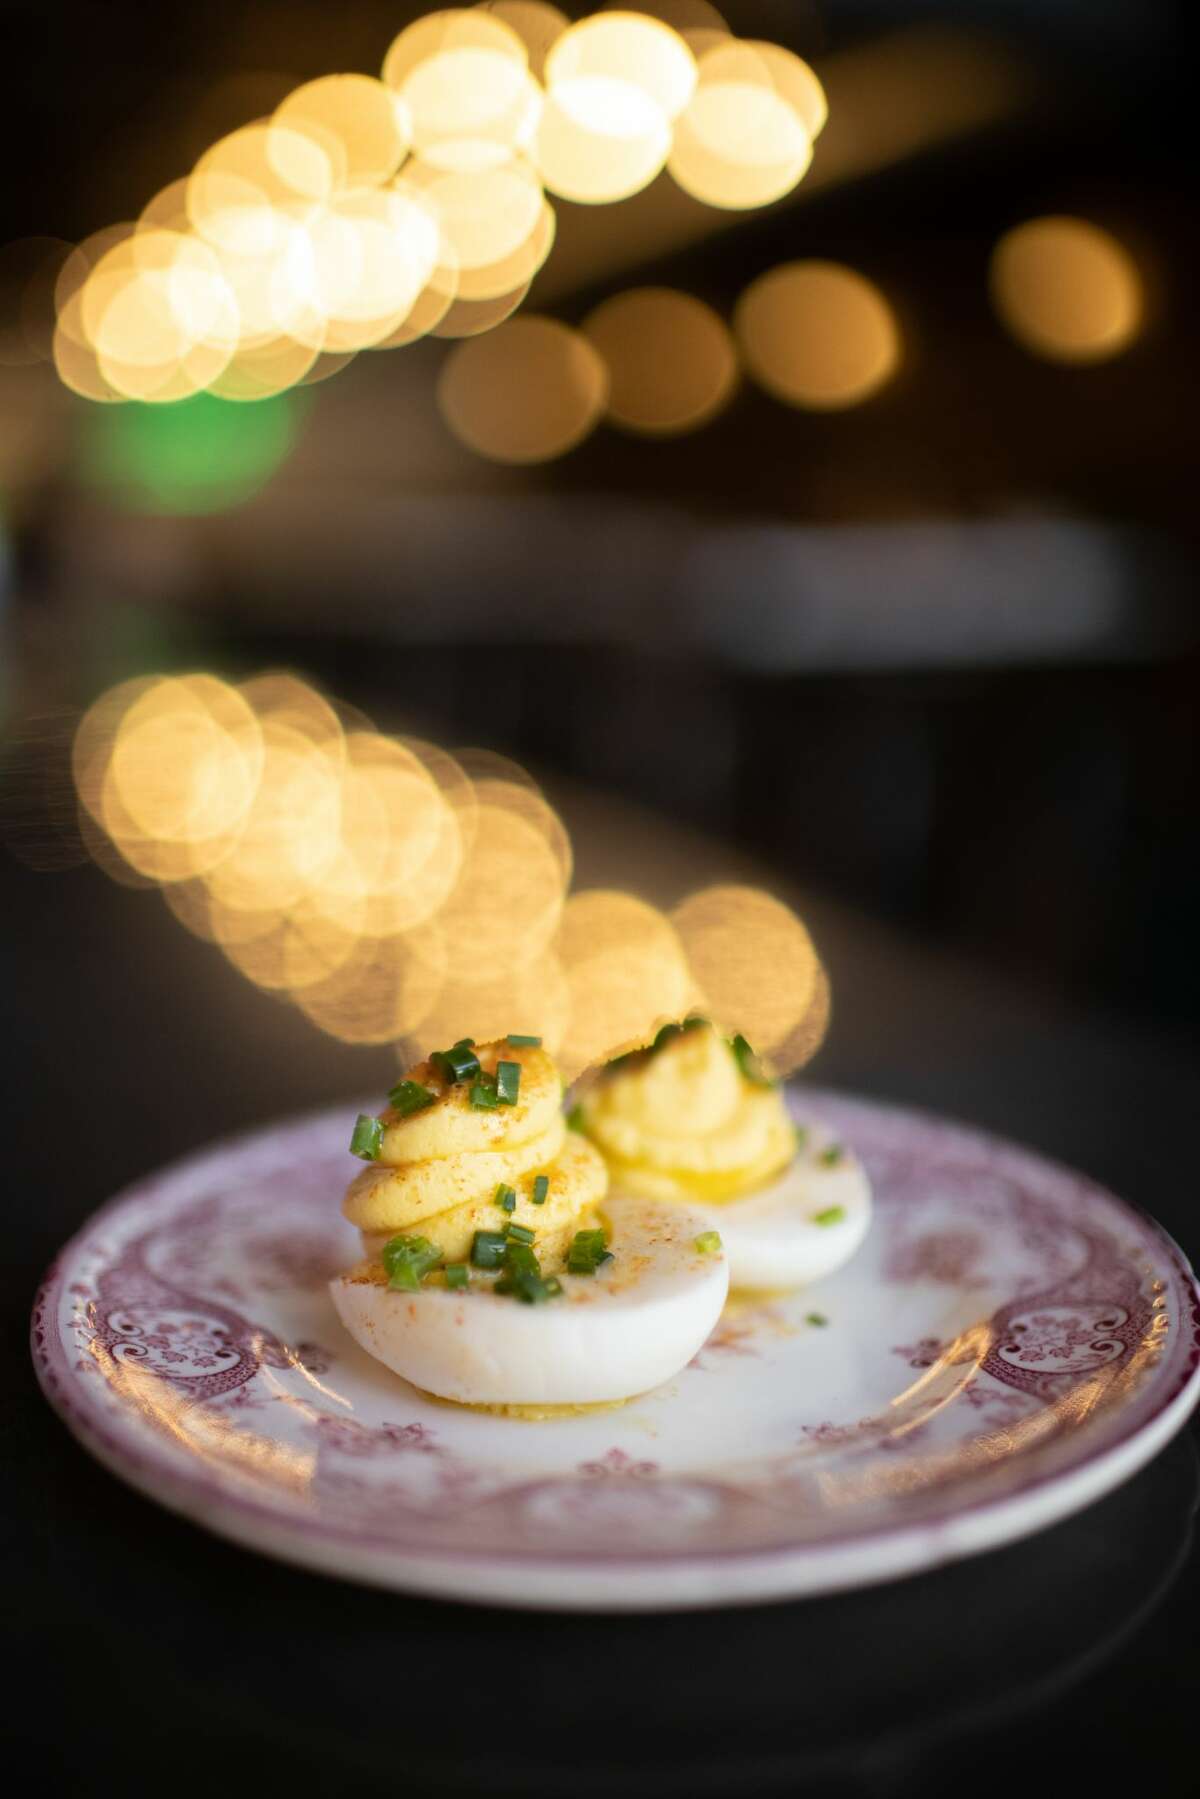 Deviled eggs at The Nest in Schenectady, a sibling of The Cuckoo's Nest in Albany. (Elario Photography for The Nest.)